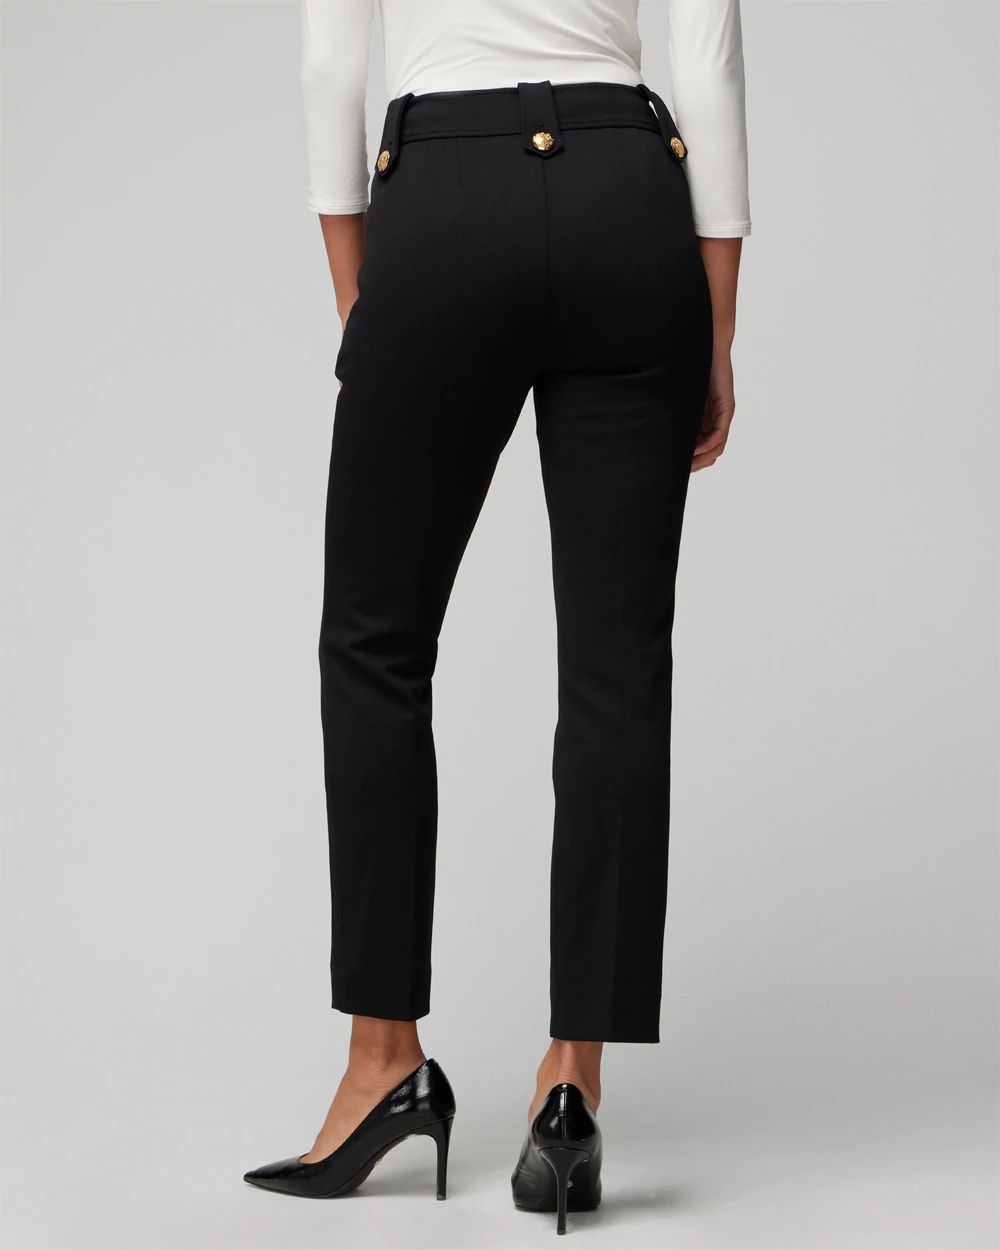 Petite WHBM® Jolie Button Straight Lux Stretch Pant click to view larger image.